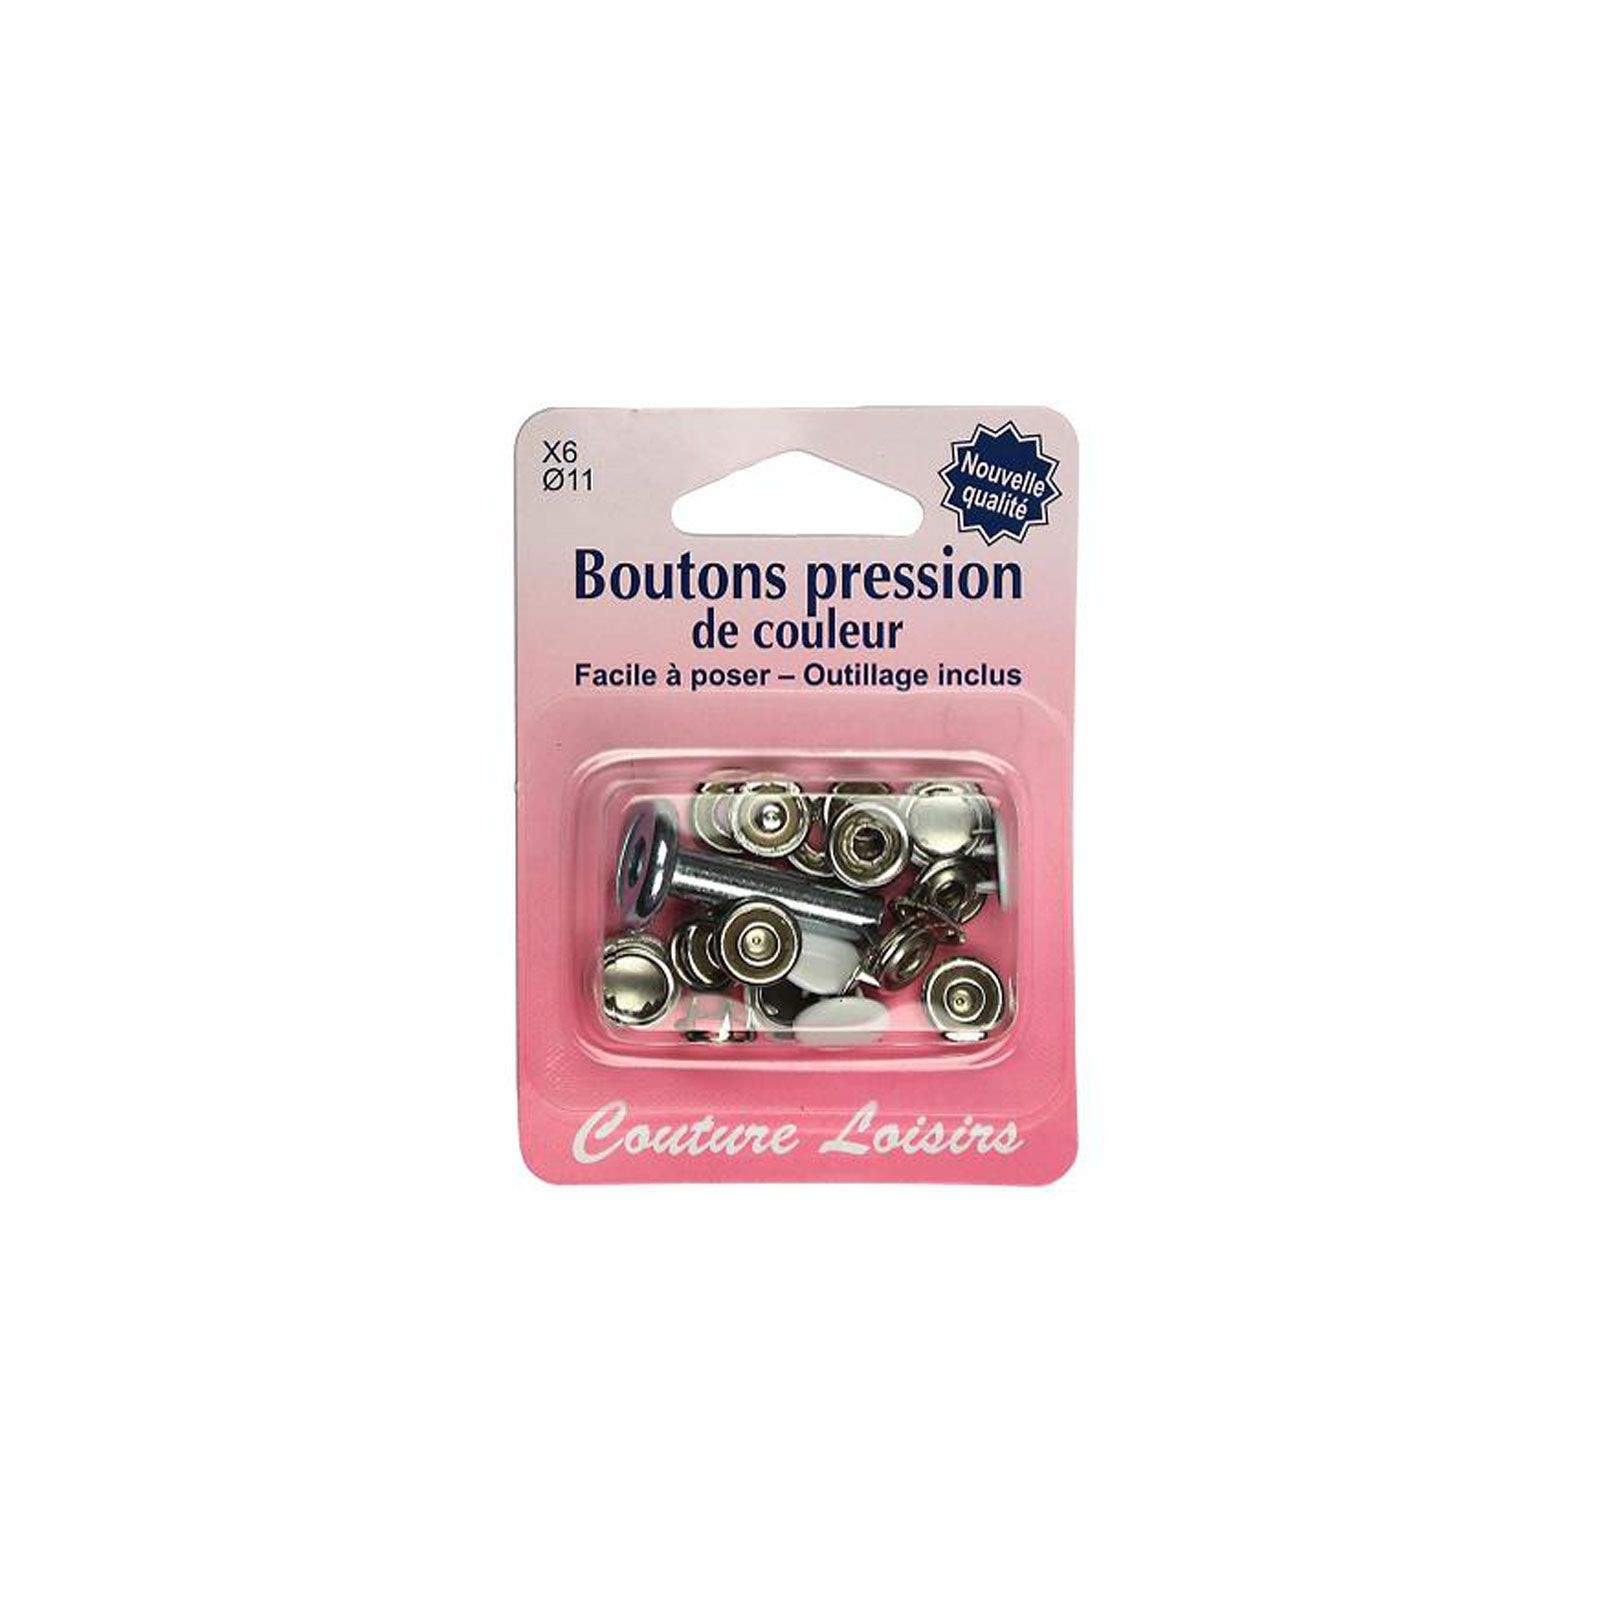 Boutons pressions et outillage blanc ( 11mm)